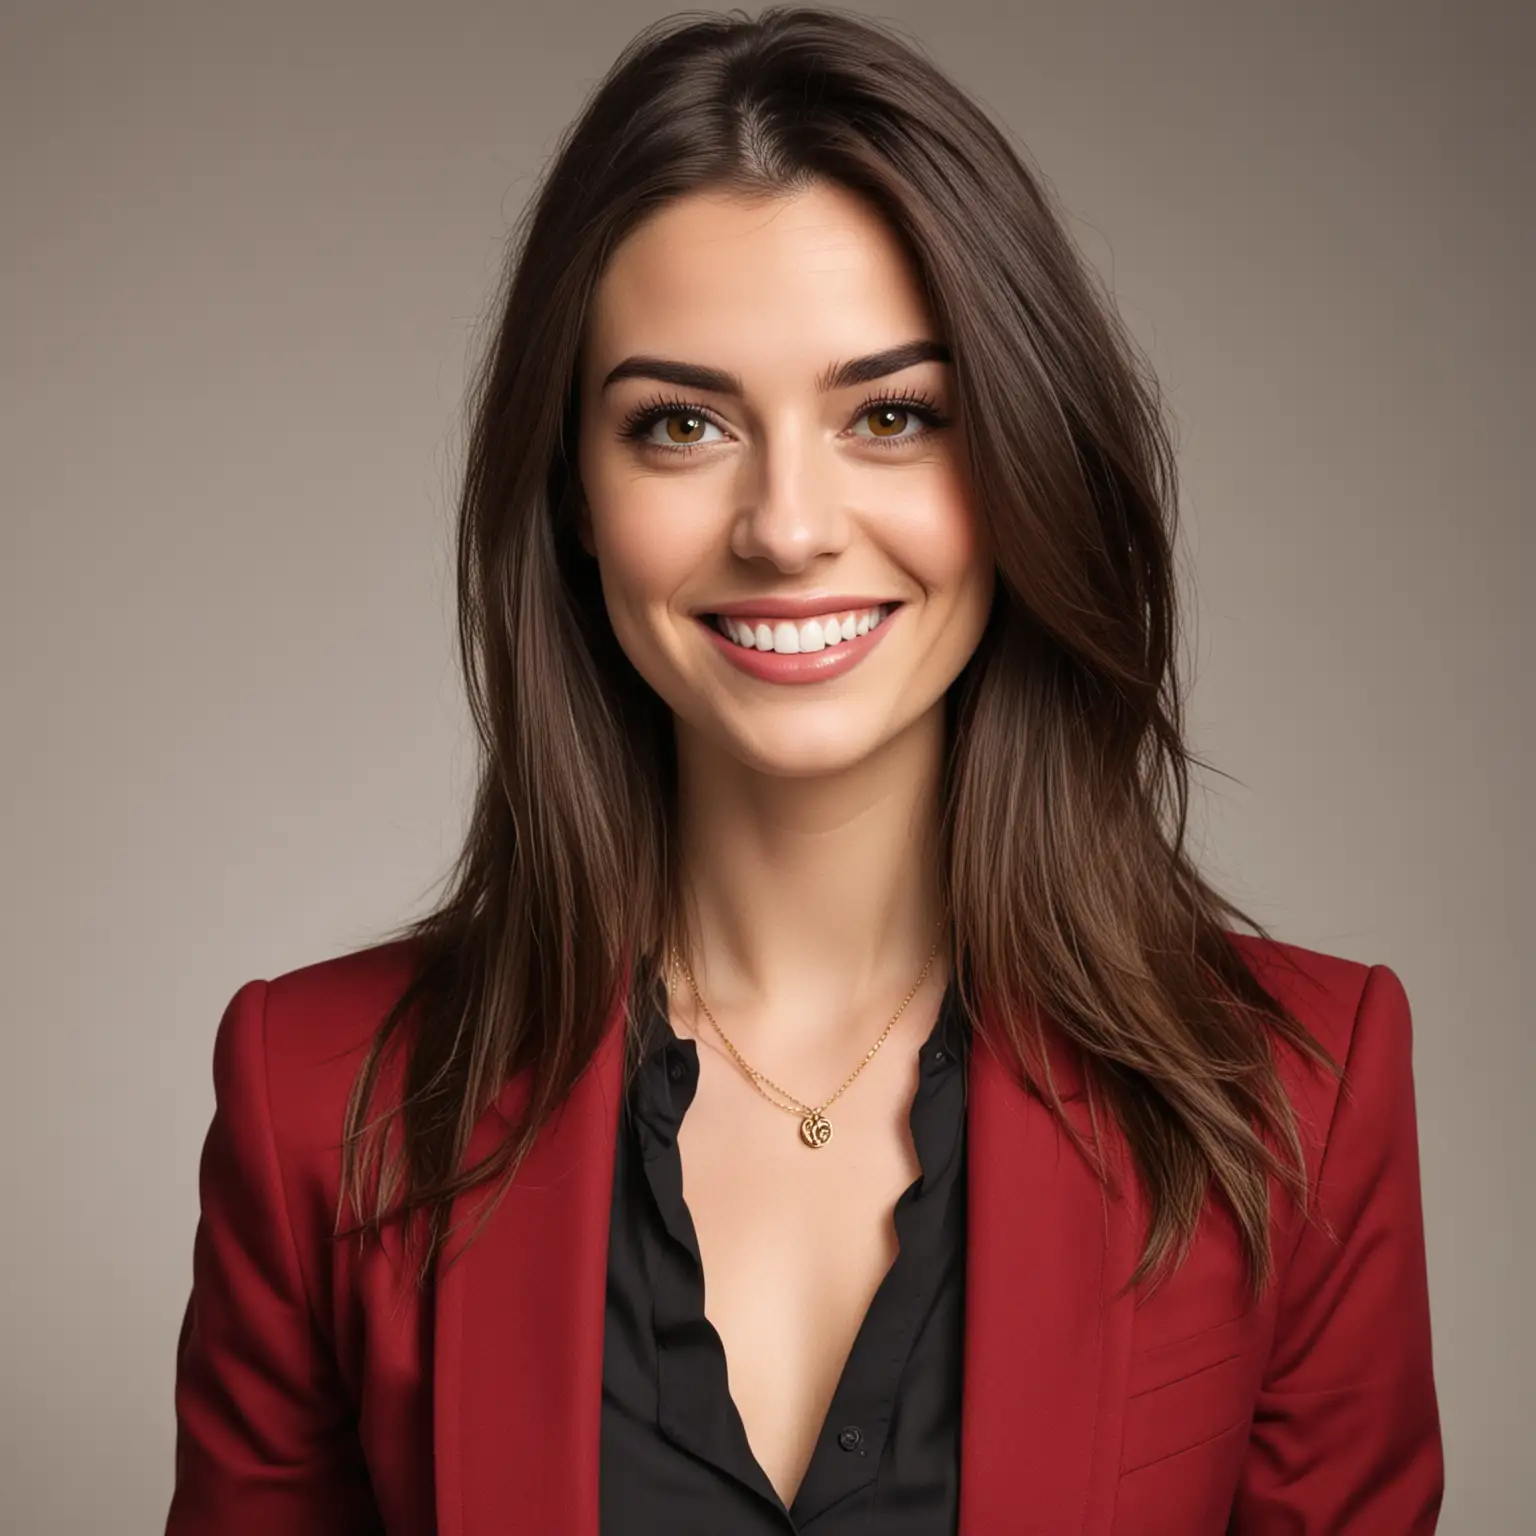 30 year old pale white woman with long dark brown blowout straight hair parted to the right, big eyelashes, red blazer, gold necklace, black shirt and black trousers. She is smiling with eyebrows raised, plain white background. She might be of English or Irish or Danish descent.